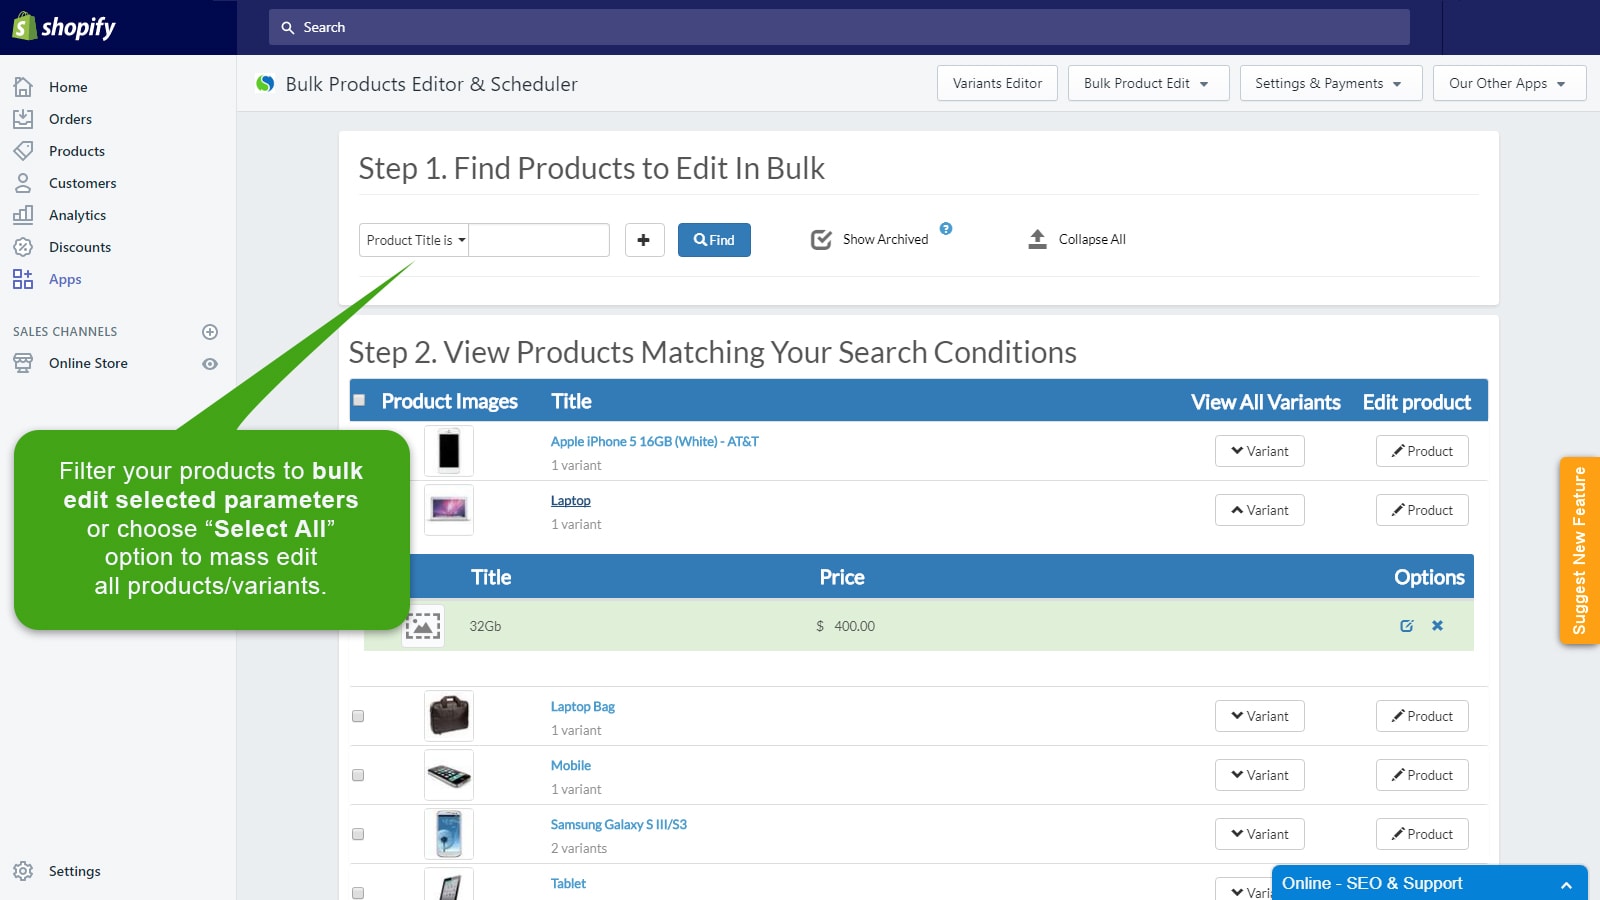 Filtering products to edit in bulk